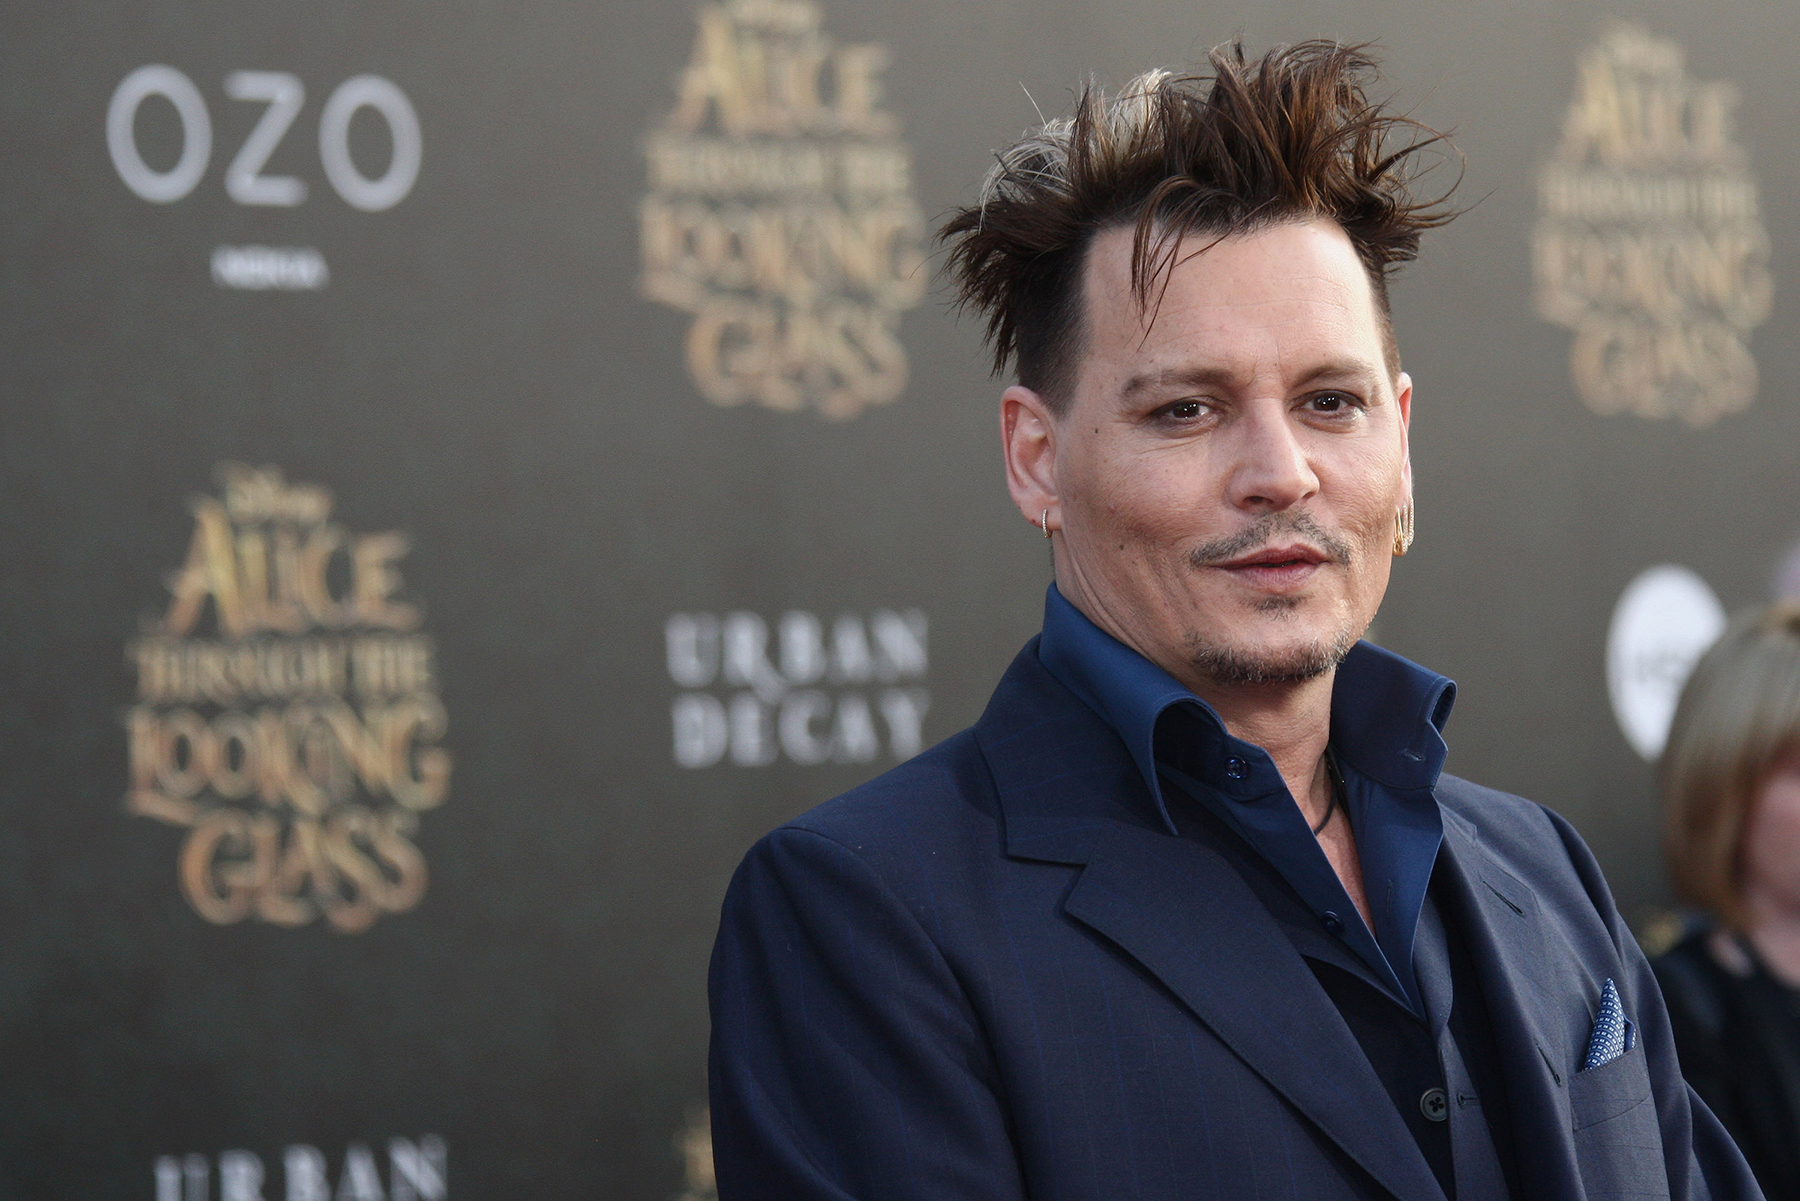 Take a tour of the extravagant penthouse Johnny Depp is selling